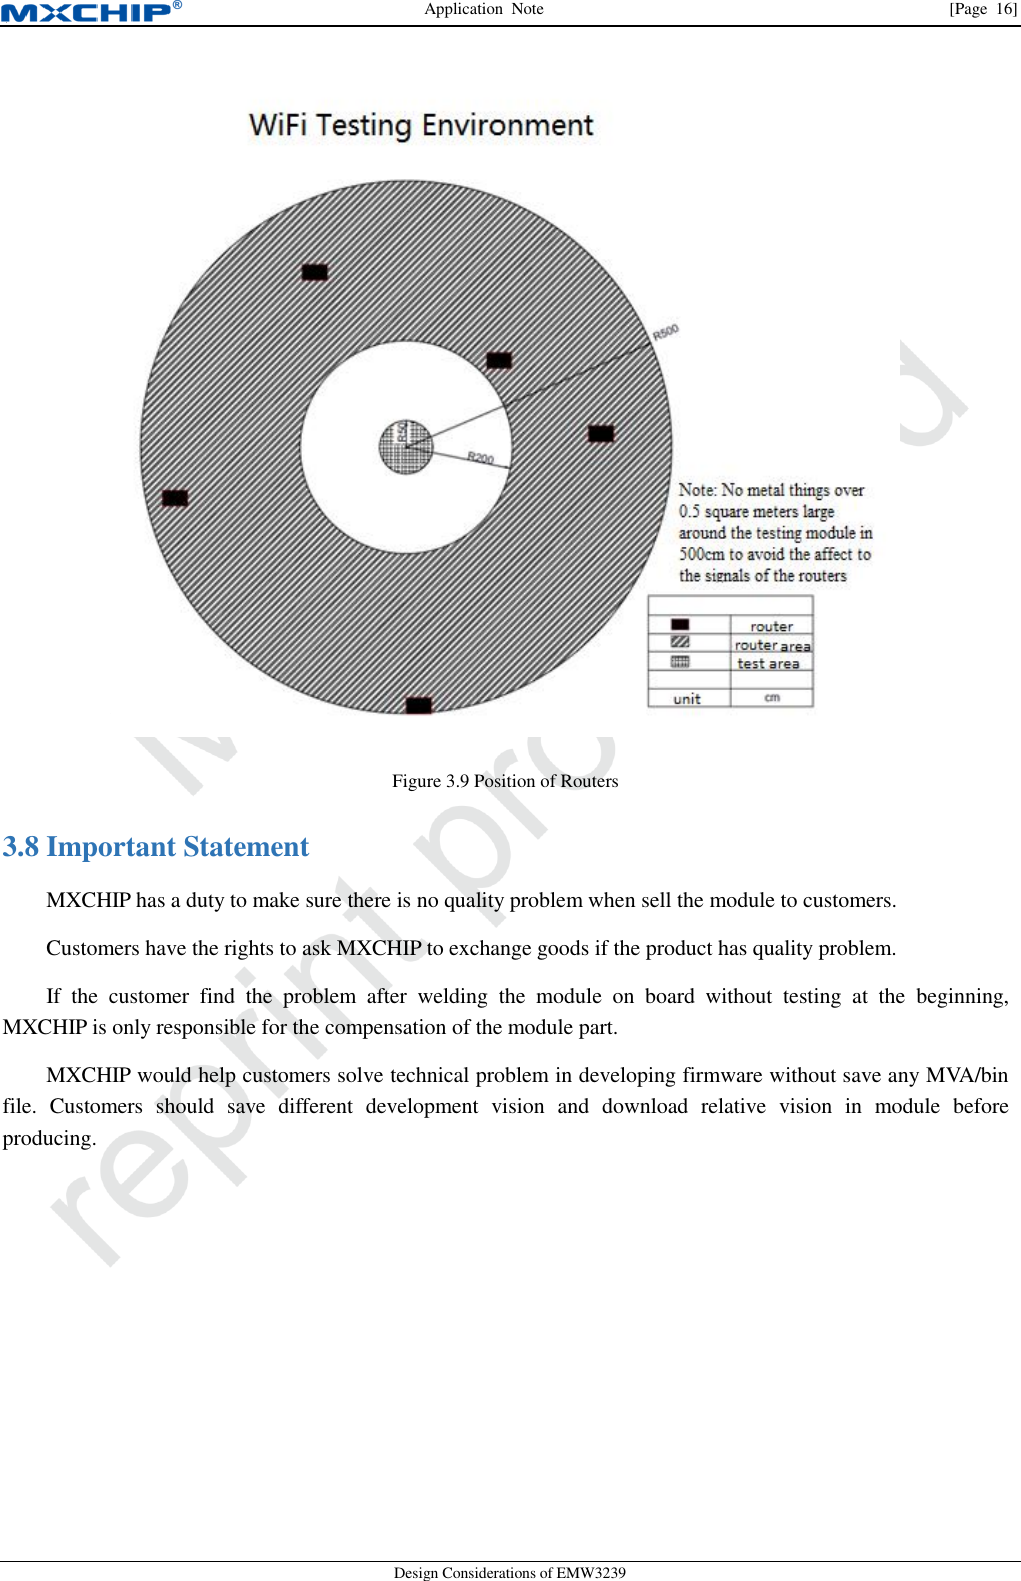 Application  Note                [Page  16] Design Considerations of EMW3239  Figure 3.9 Position of Routers  Important Statement 3.8MXCHIP has a duty to make sure there is no quality problem when sell the module to customers.   Customers have the rights to ask MXCHIP to exchange goods if the product has quality problem. If  the  customer  find  the  problem  after  welding  the  module  on  board  without  testing  at  the  beginning, MXCHIP is only responsible for the compensation of the module part. MXCHIP would help customers solve technical problem in developing firmware without save any MVA/bin file.  Customers  should  save  different  development  vision  and  download  relative  vision  in  module  before producing. 